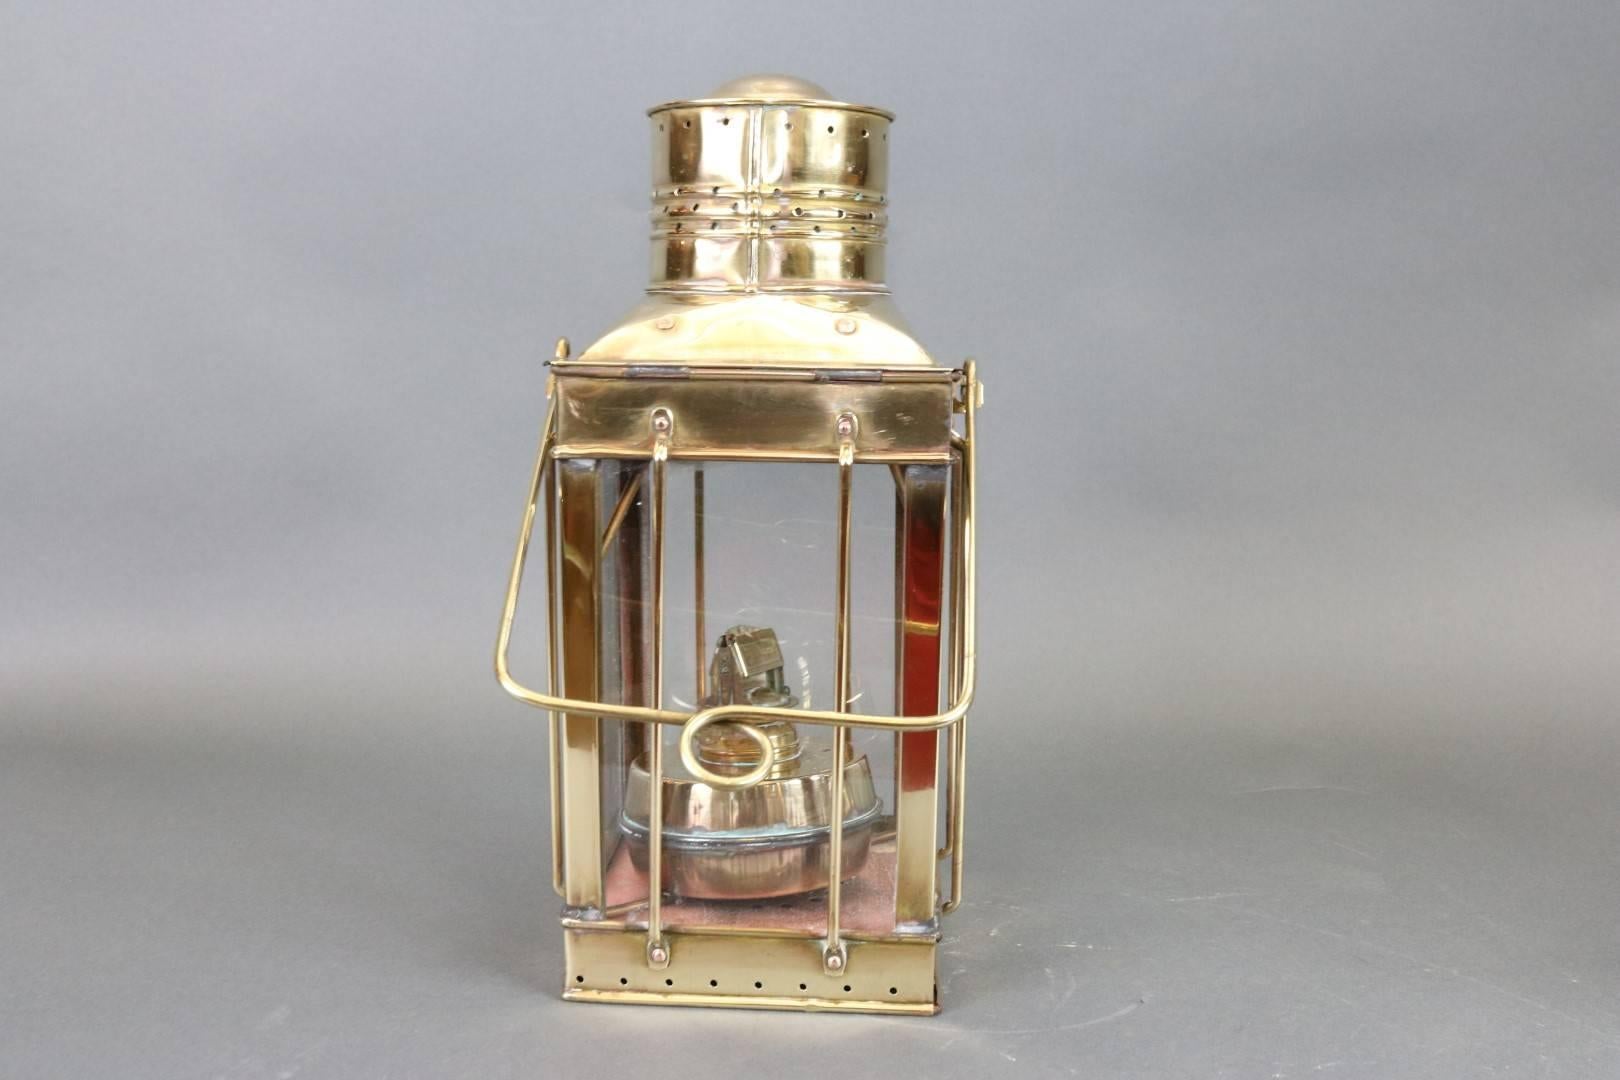 Highly polished ship's lantern by the English firm Davey. Vented top, carry handle, oil burner, and etc. Dimensions: 7" L x 7" W x 15" H.